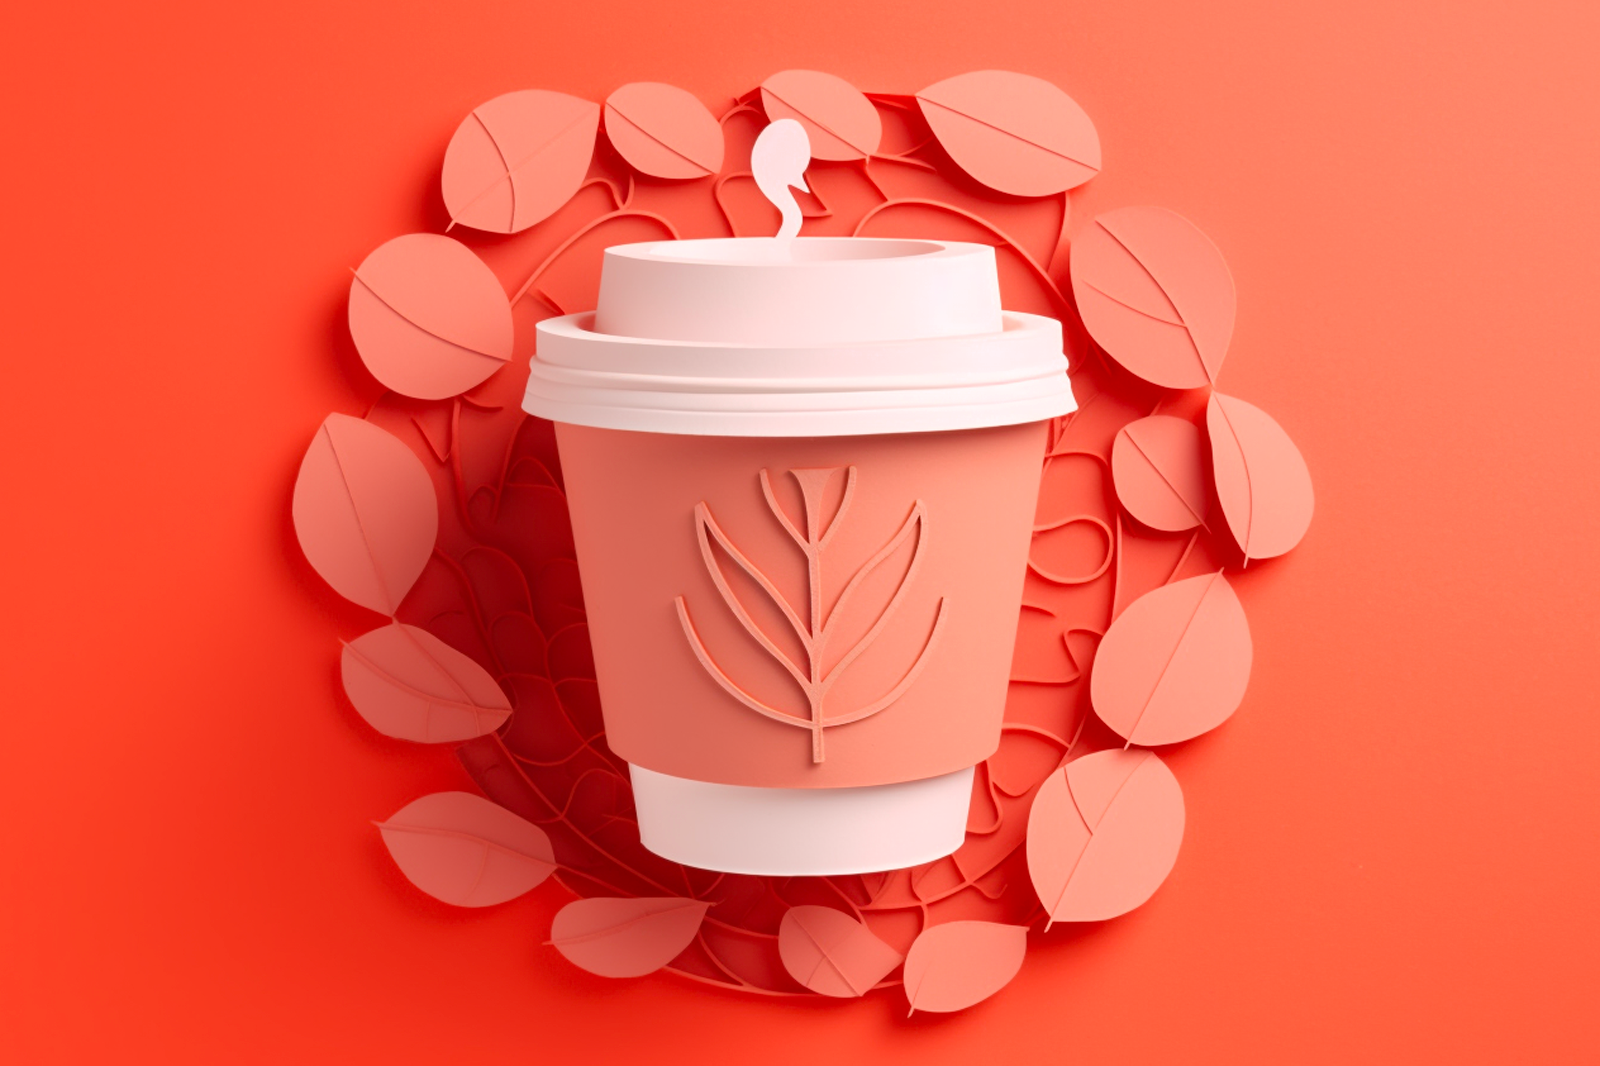 Small cup with white lid surrounded by red leaf on a vibrant red background